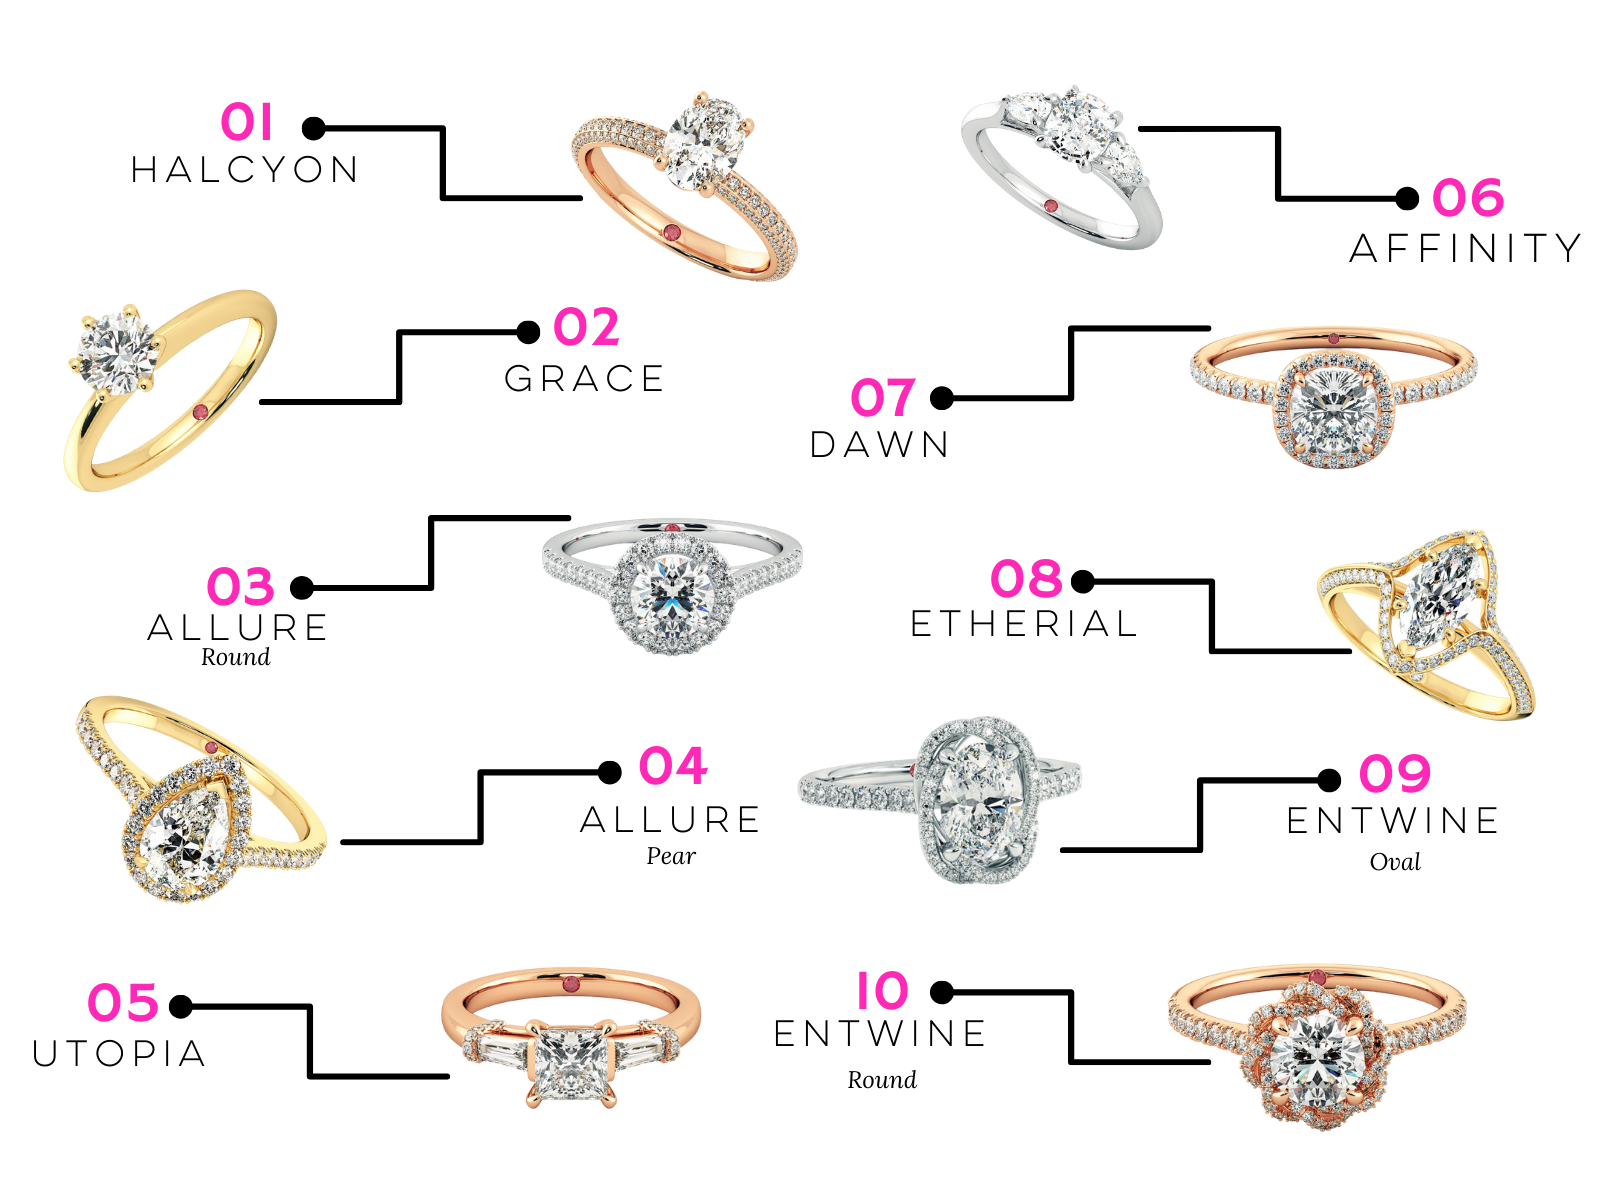 Graphic of 10 of Taylor & Hart's engagement rings